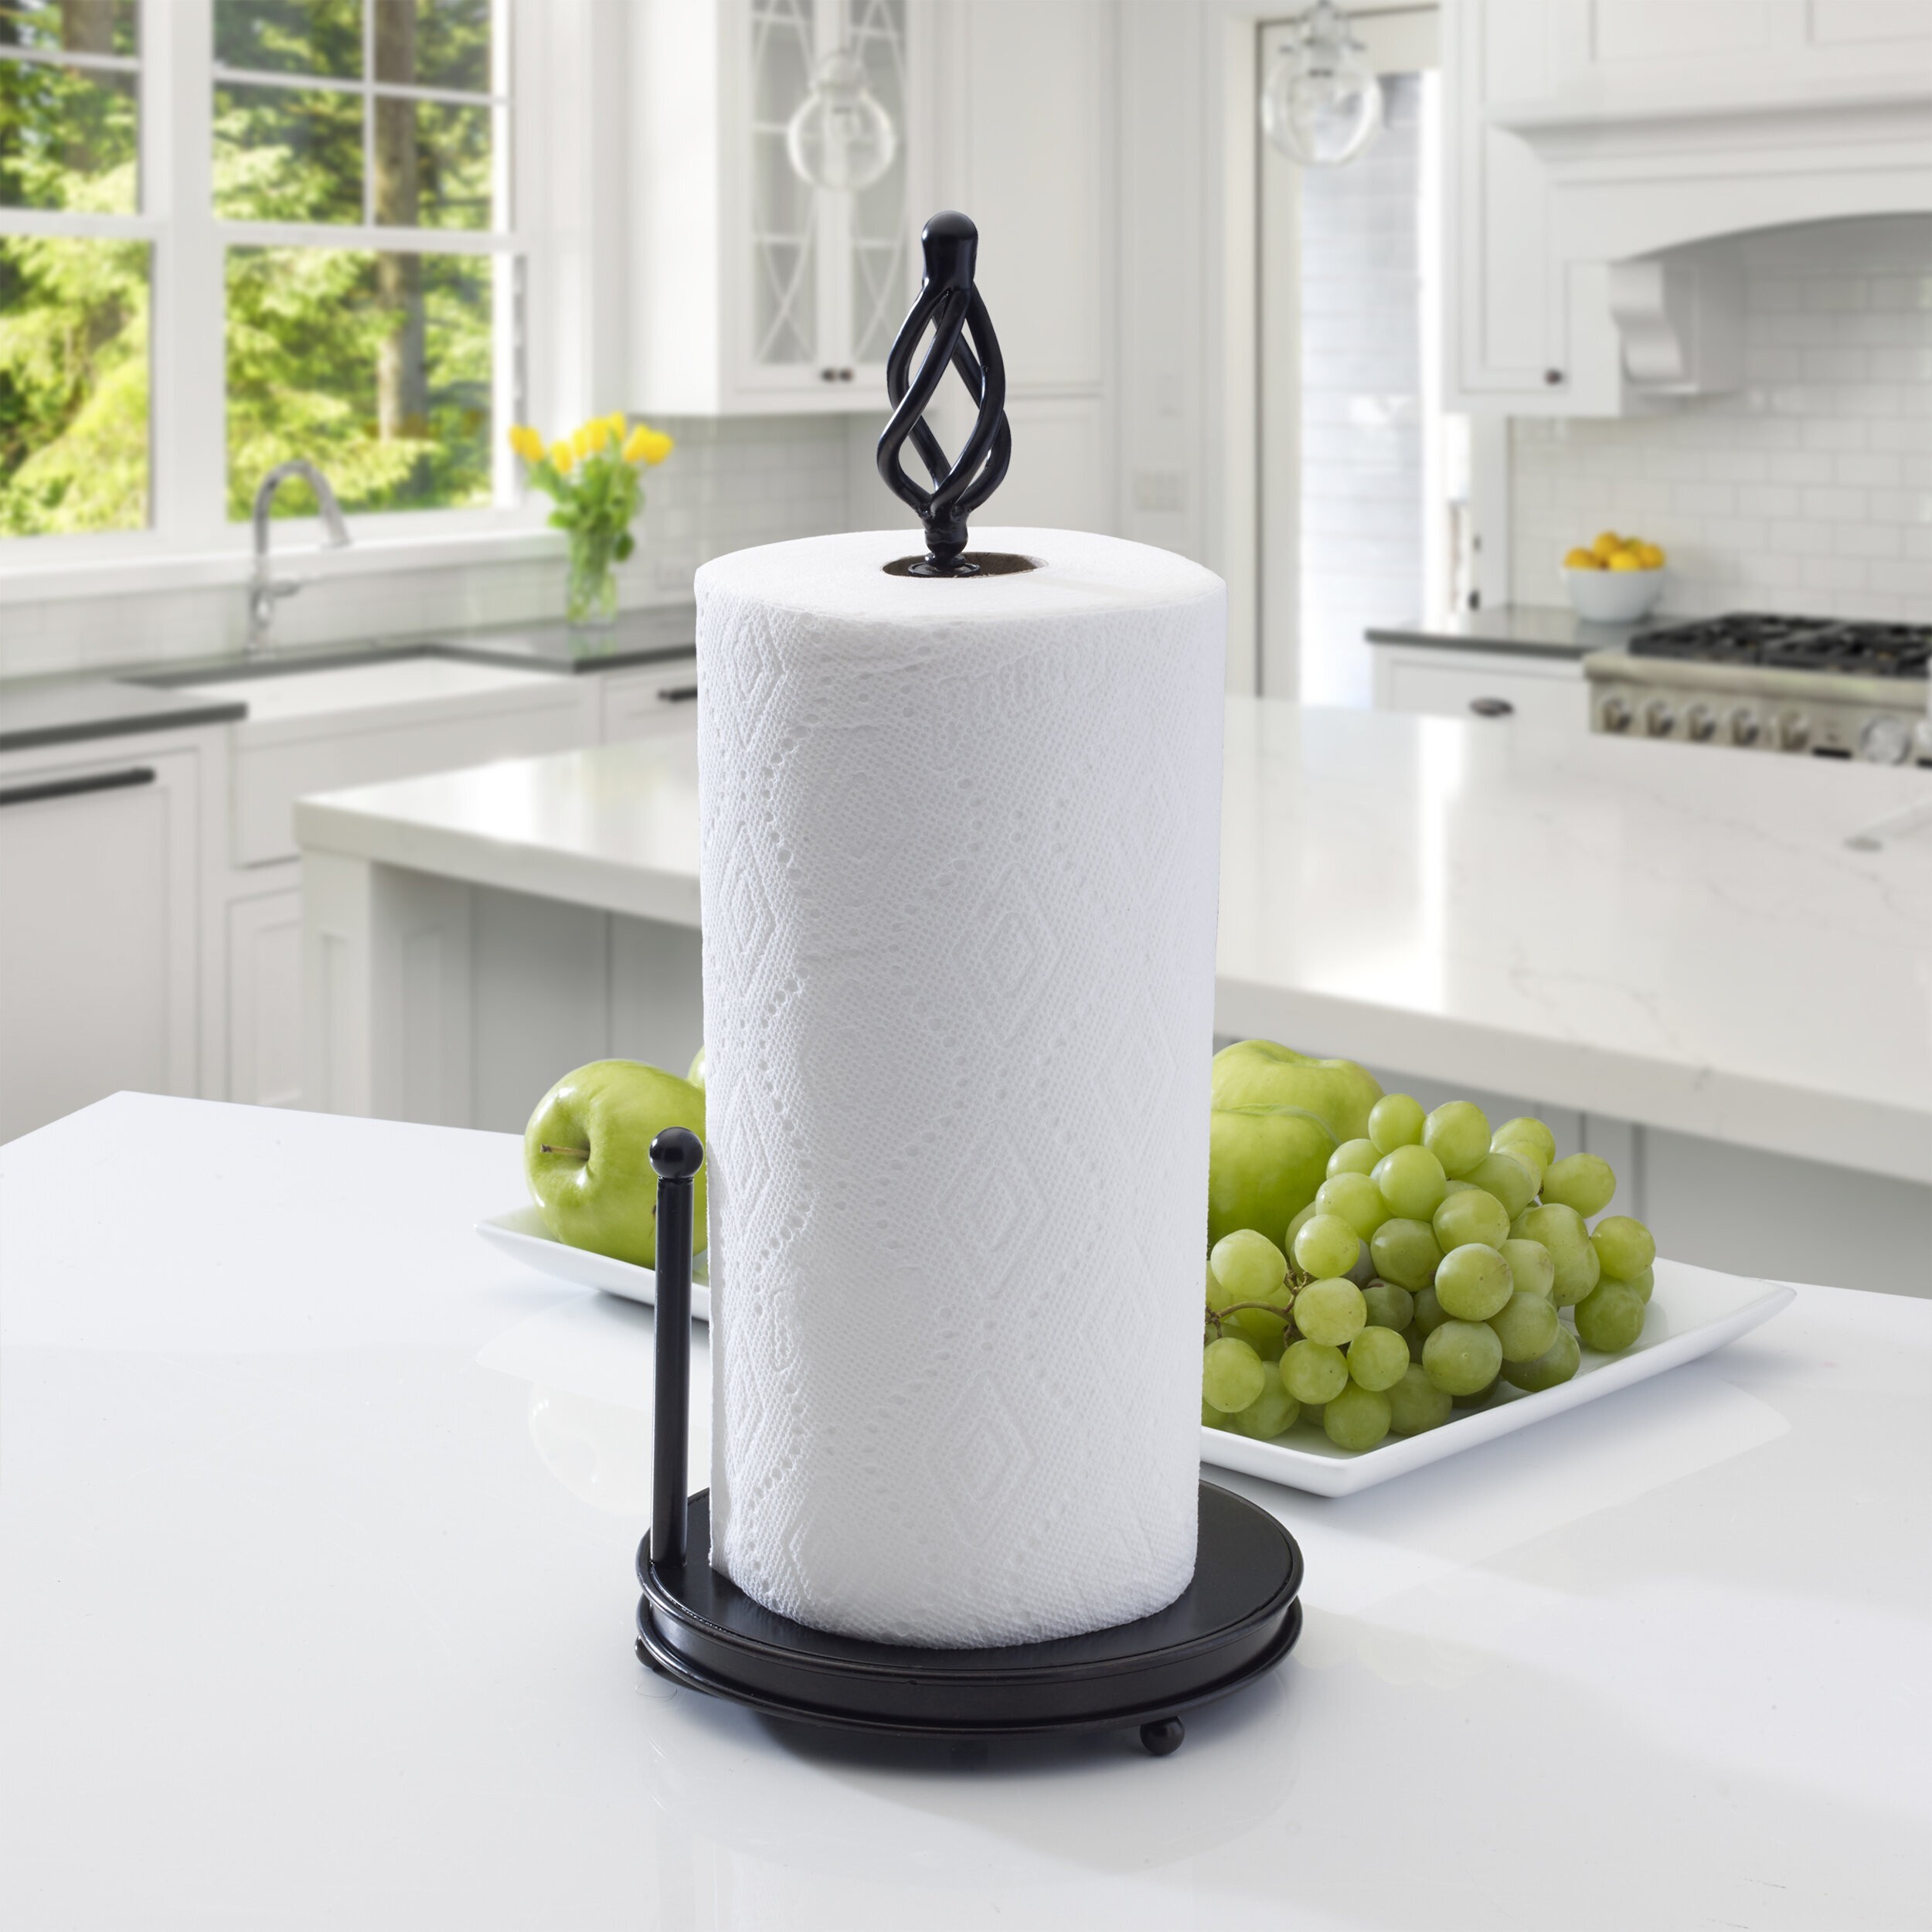 How to Choose Paper Towel & Napkin Holders - Foter